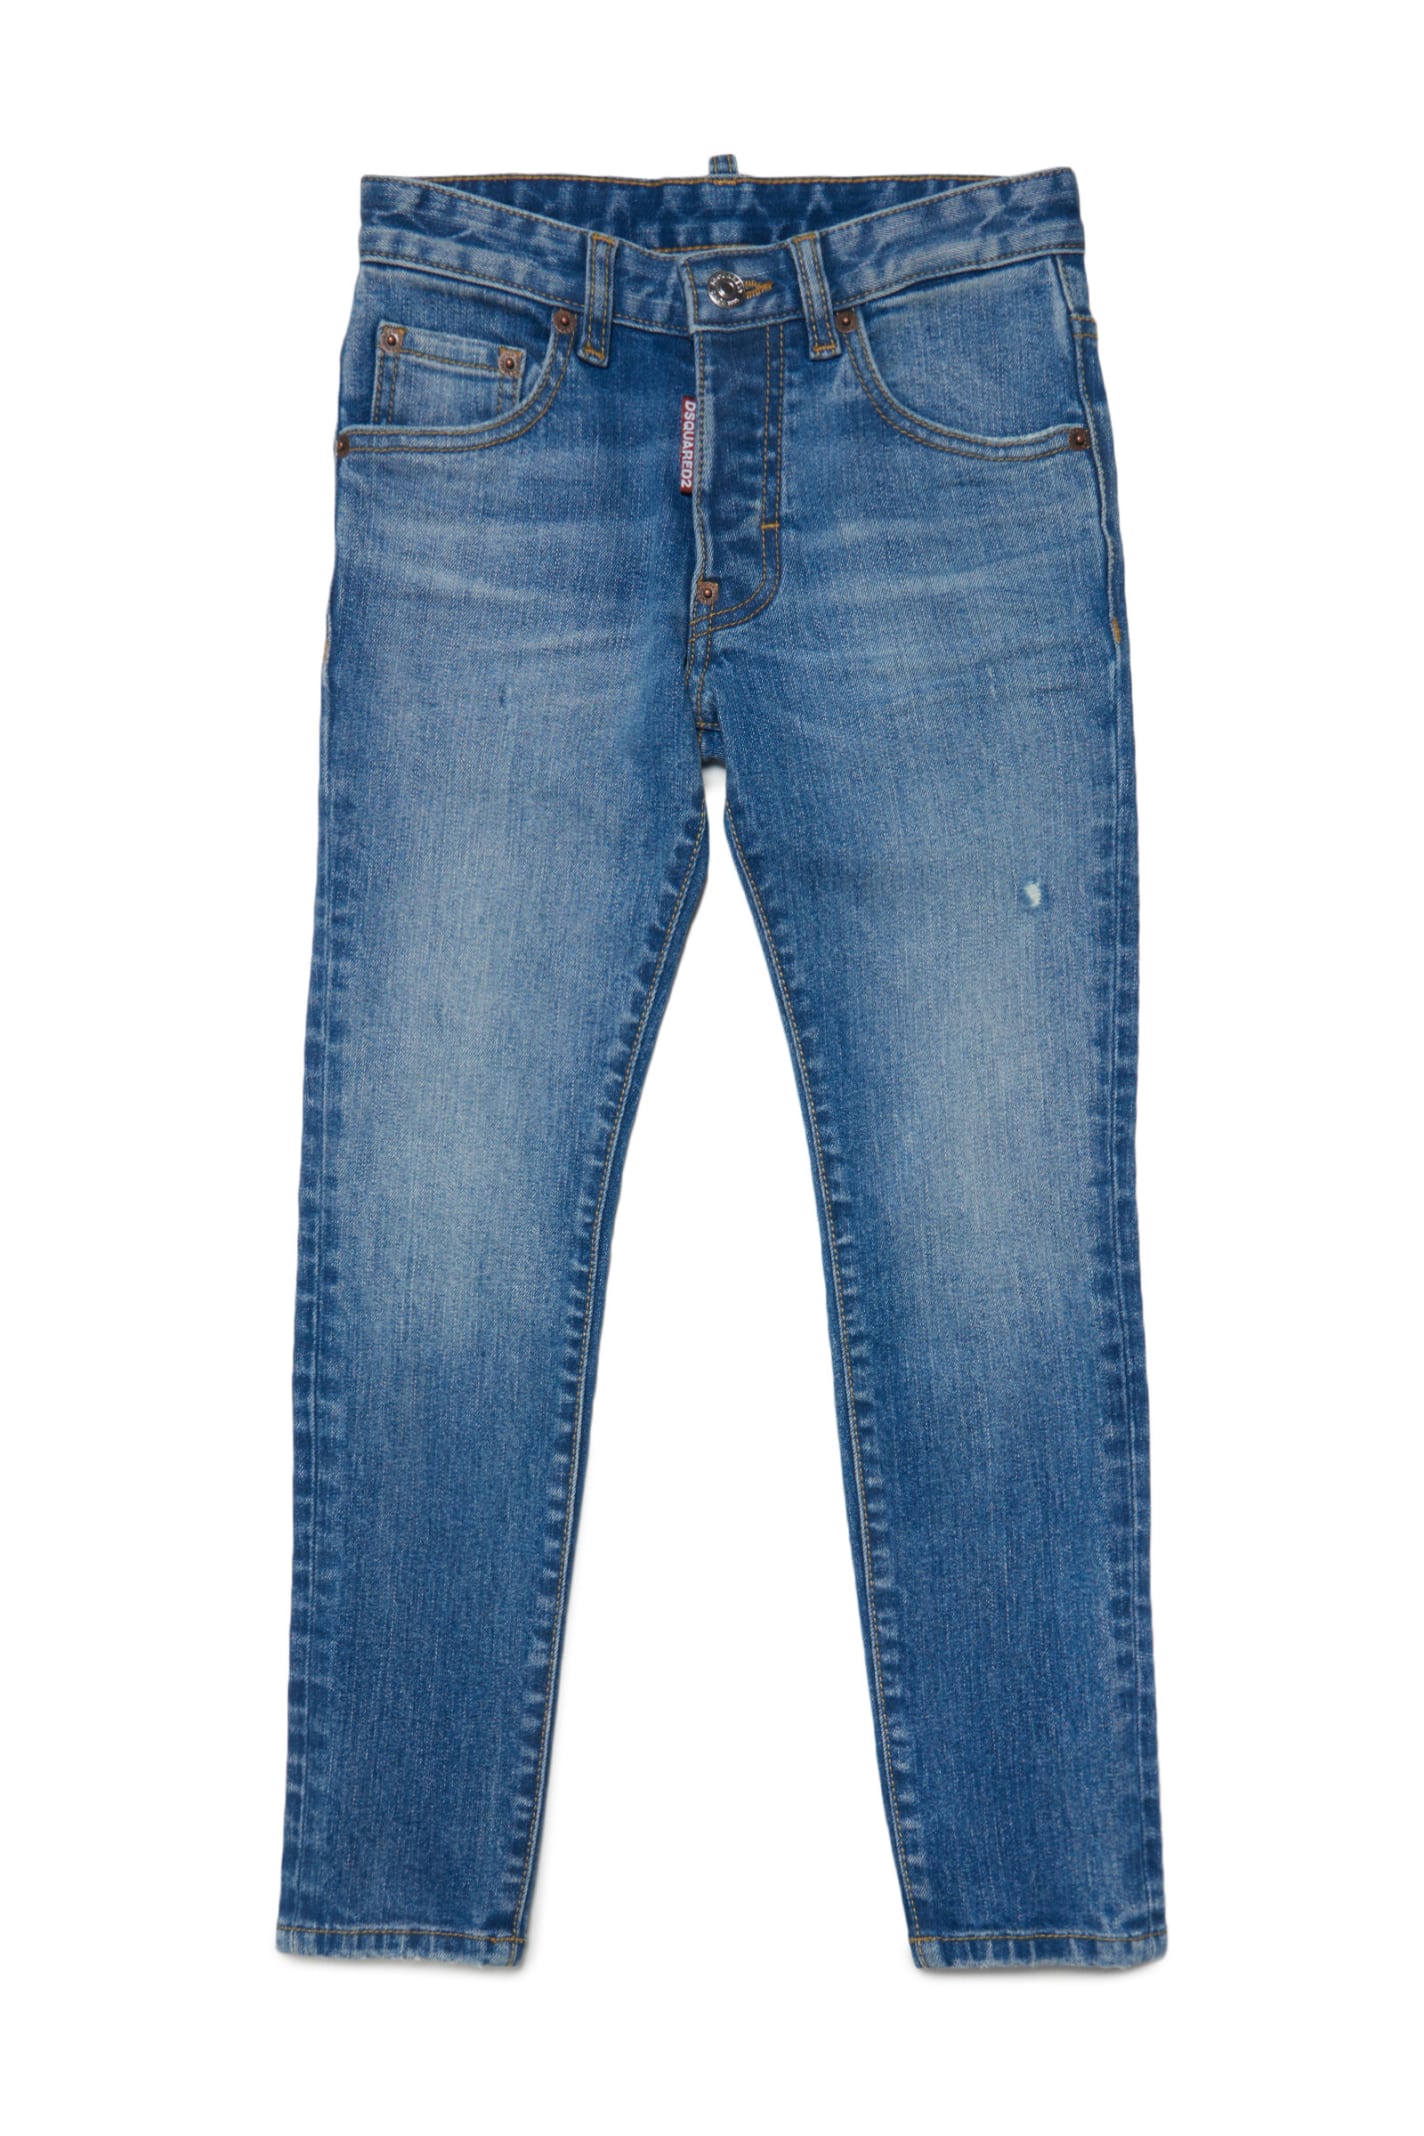 Dsquared2 D2p118lm Skater Jean Trousers Dsquared Jeans Skater Skinny Washed-out Blue